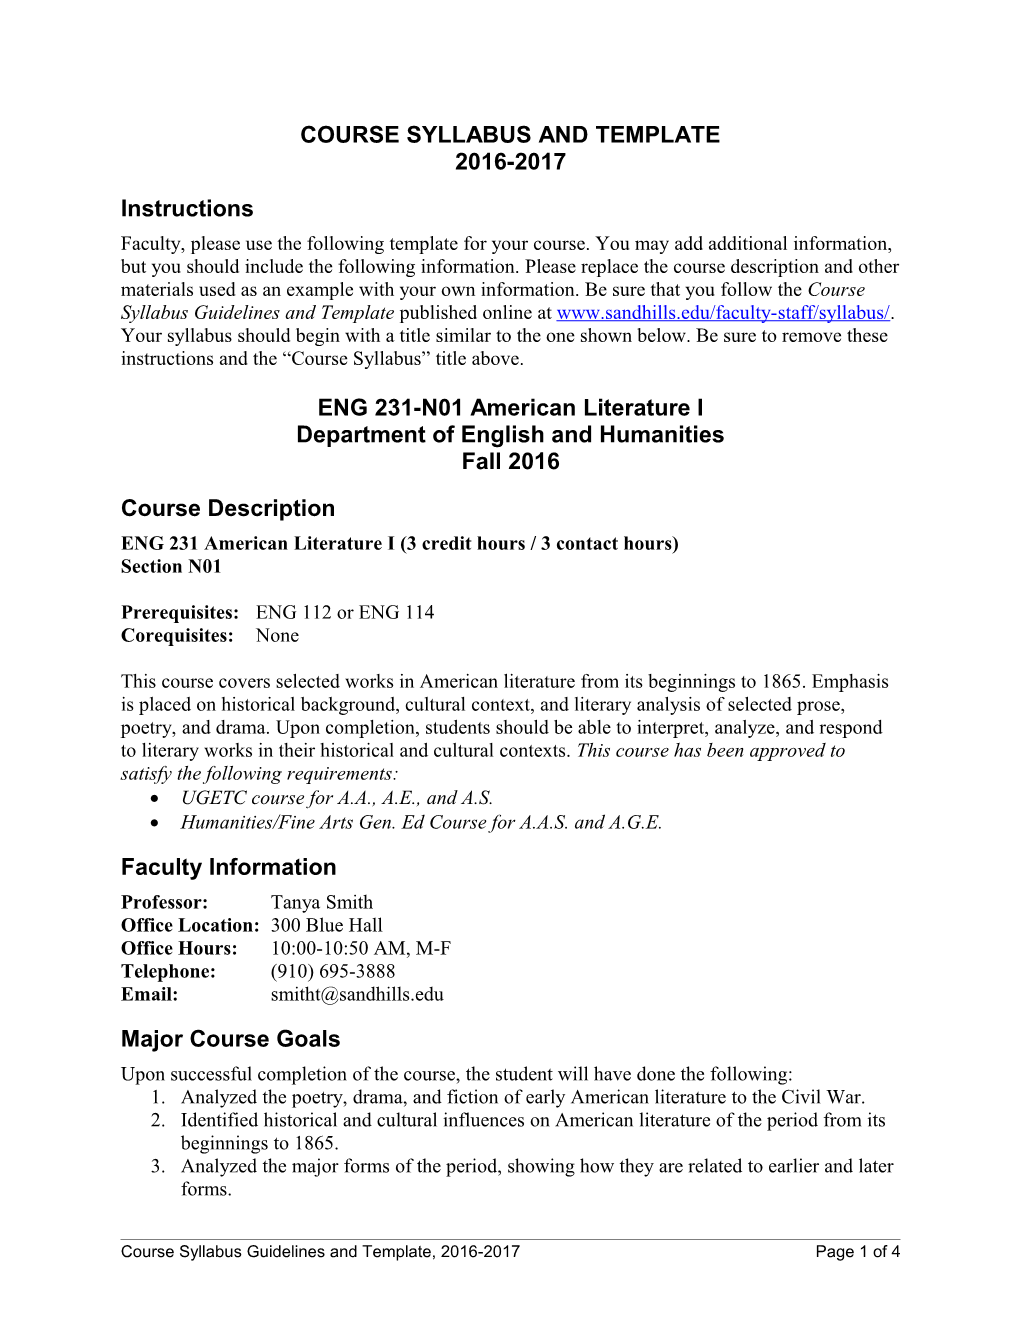 Course Syllabus Guidelines and Template